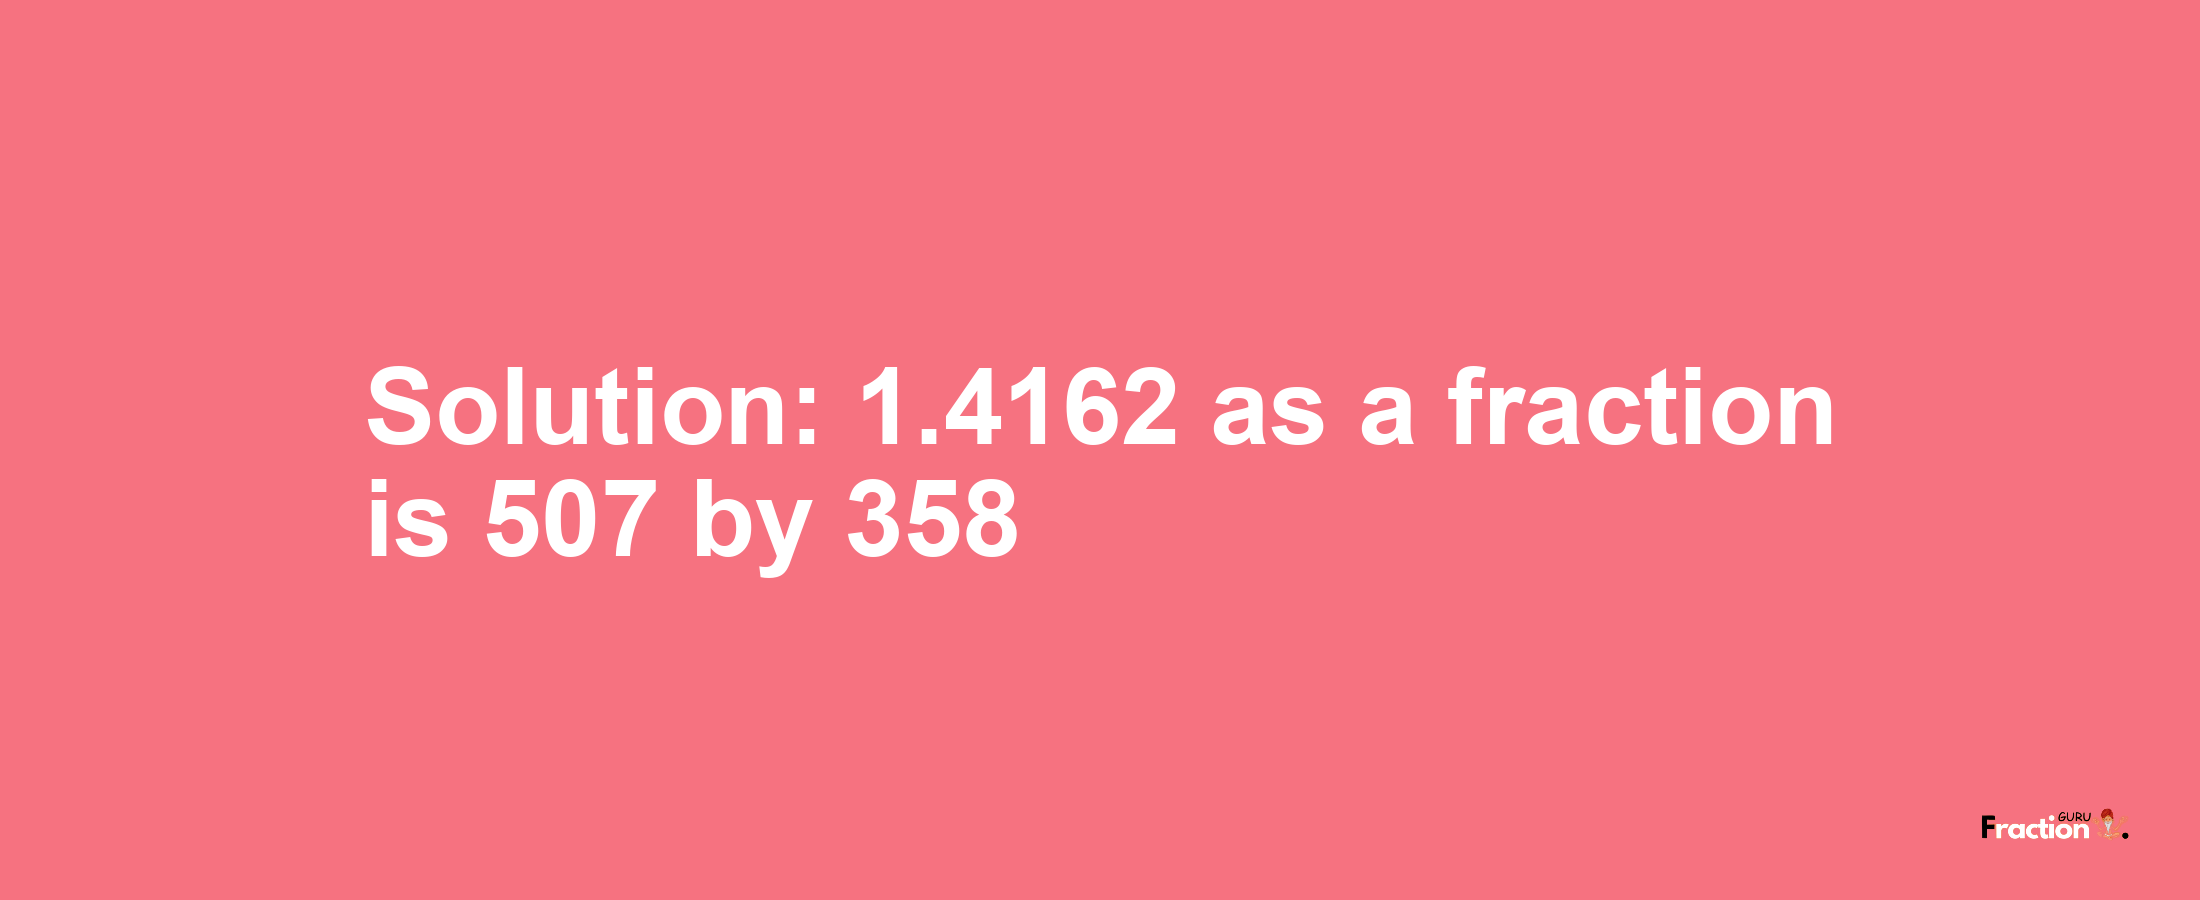 Solution:1.4162 as a fraction is 507/358